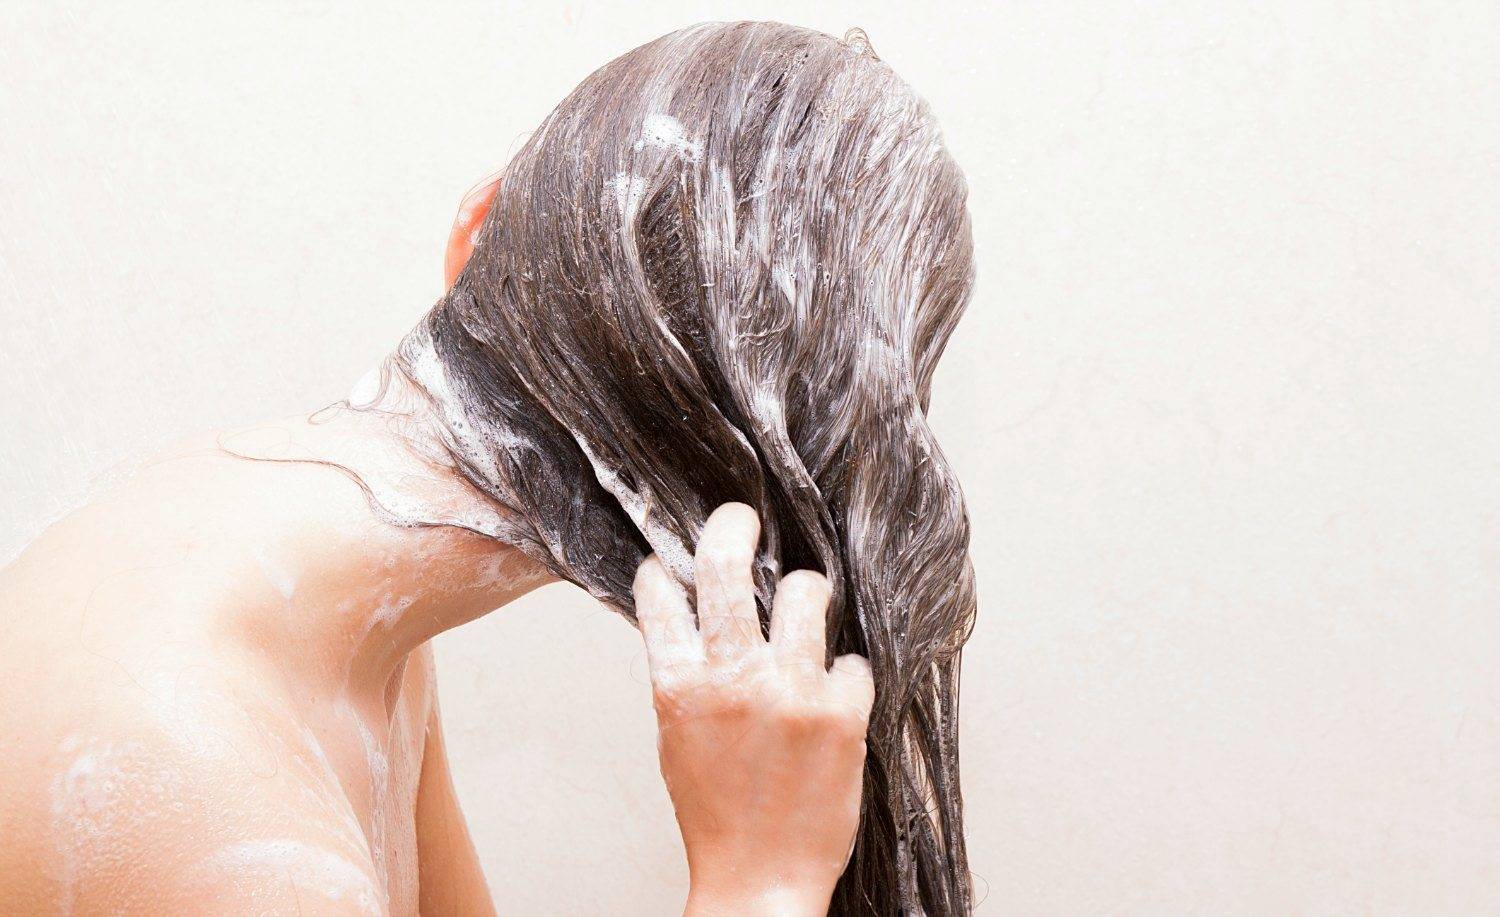 Use  cool water to rinse hair